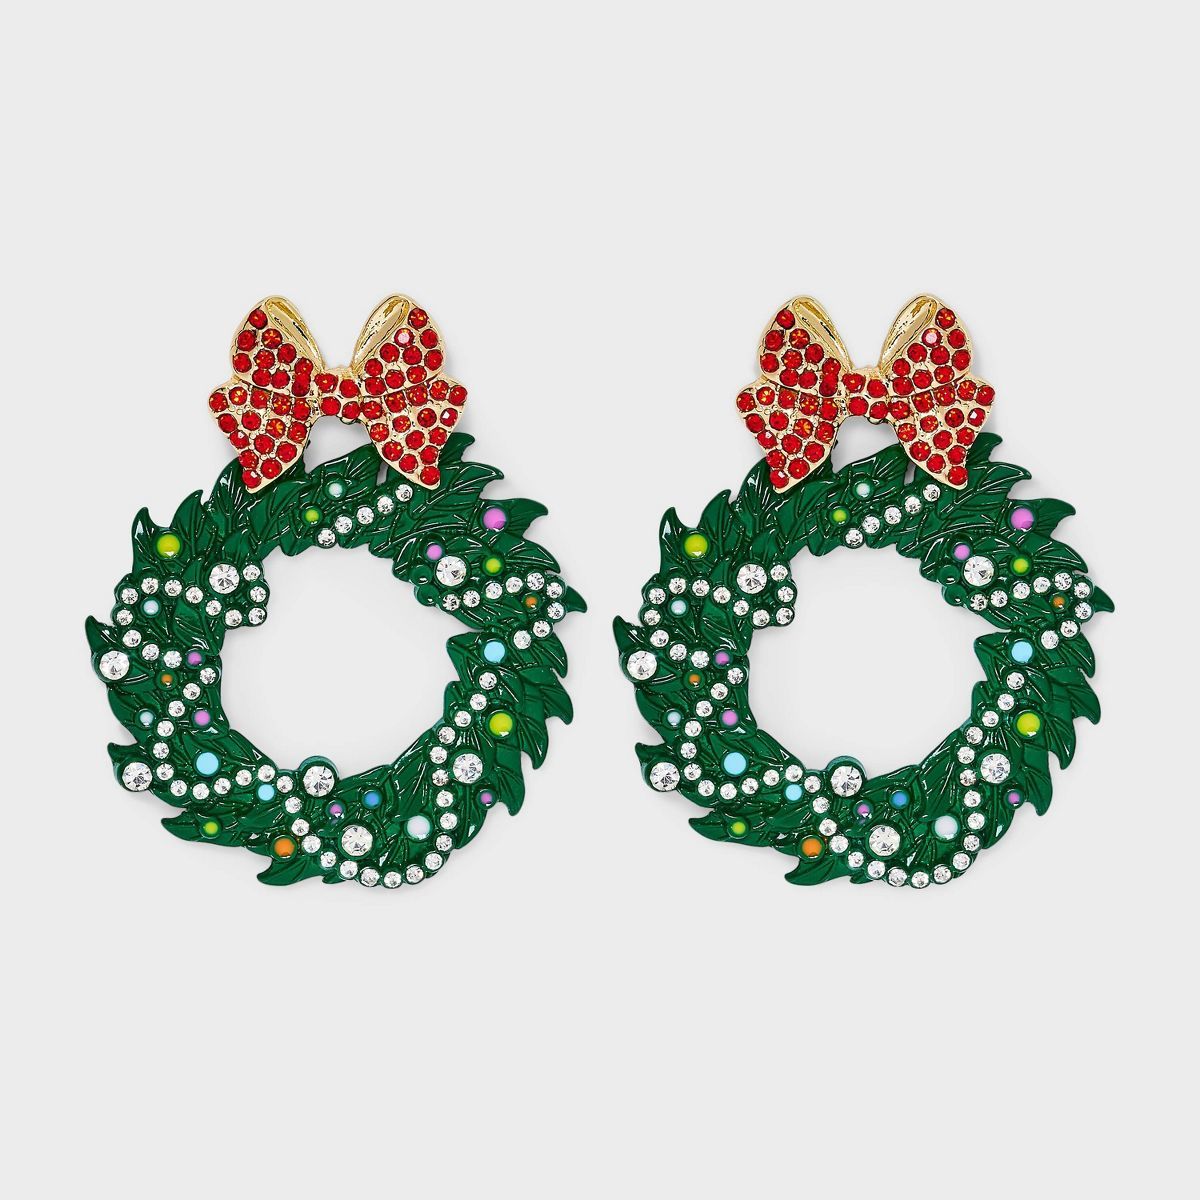 SUGARFIX by BaubleBar "Well Within Wreath" Stud Earrings - Green | Target